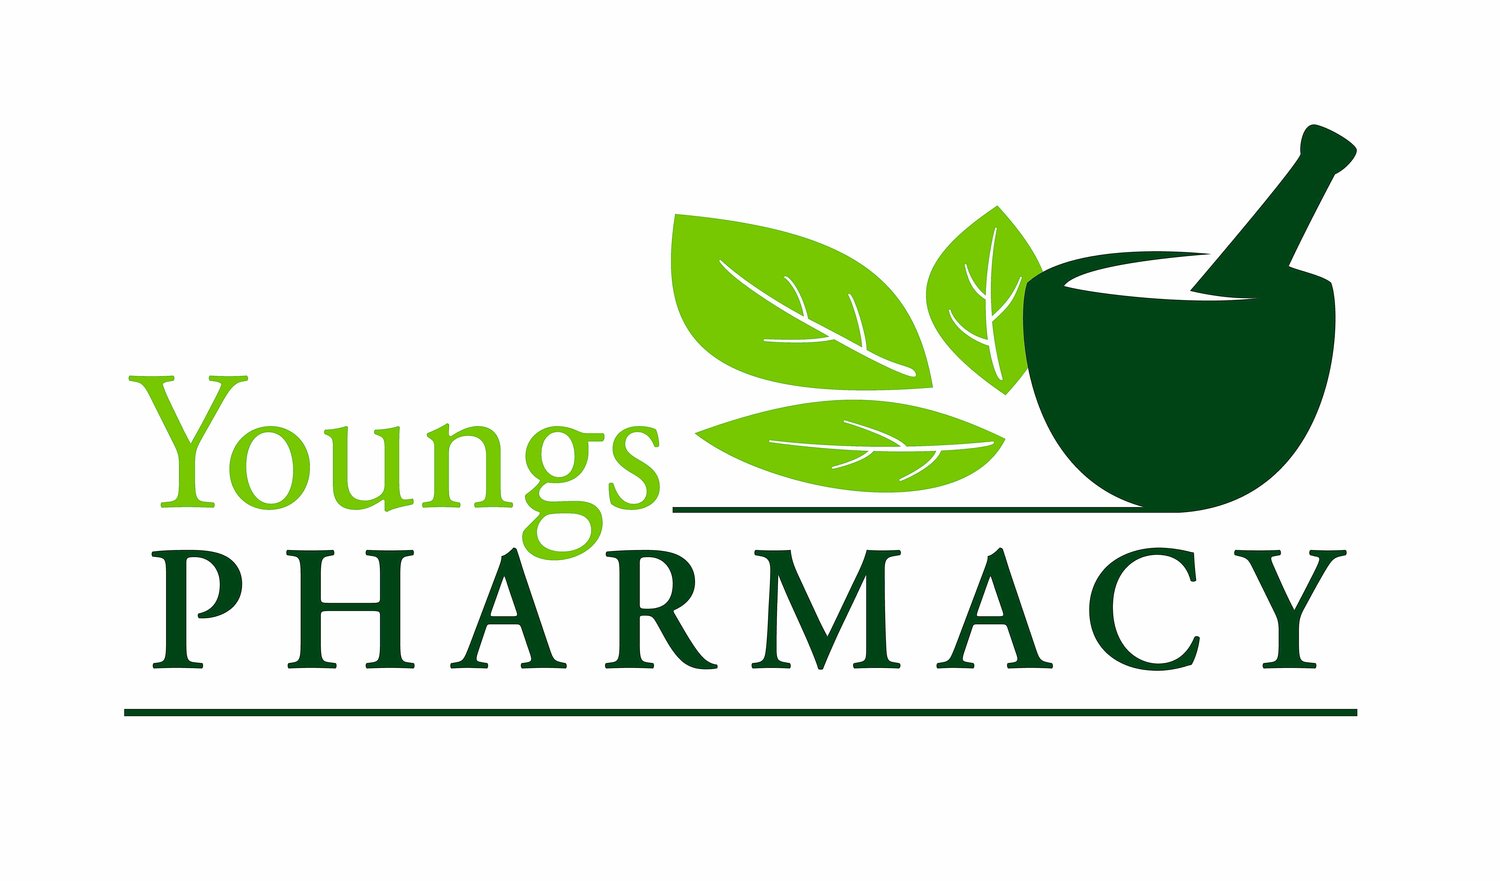 Youngs Pharmacy